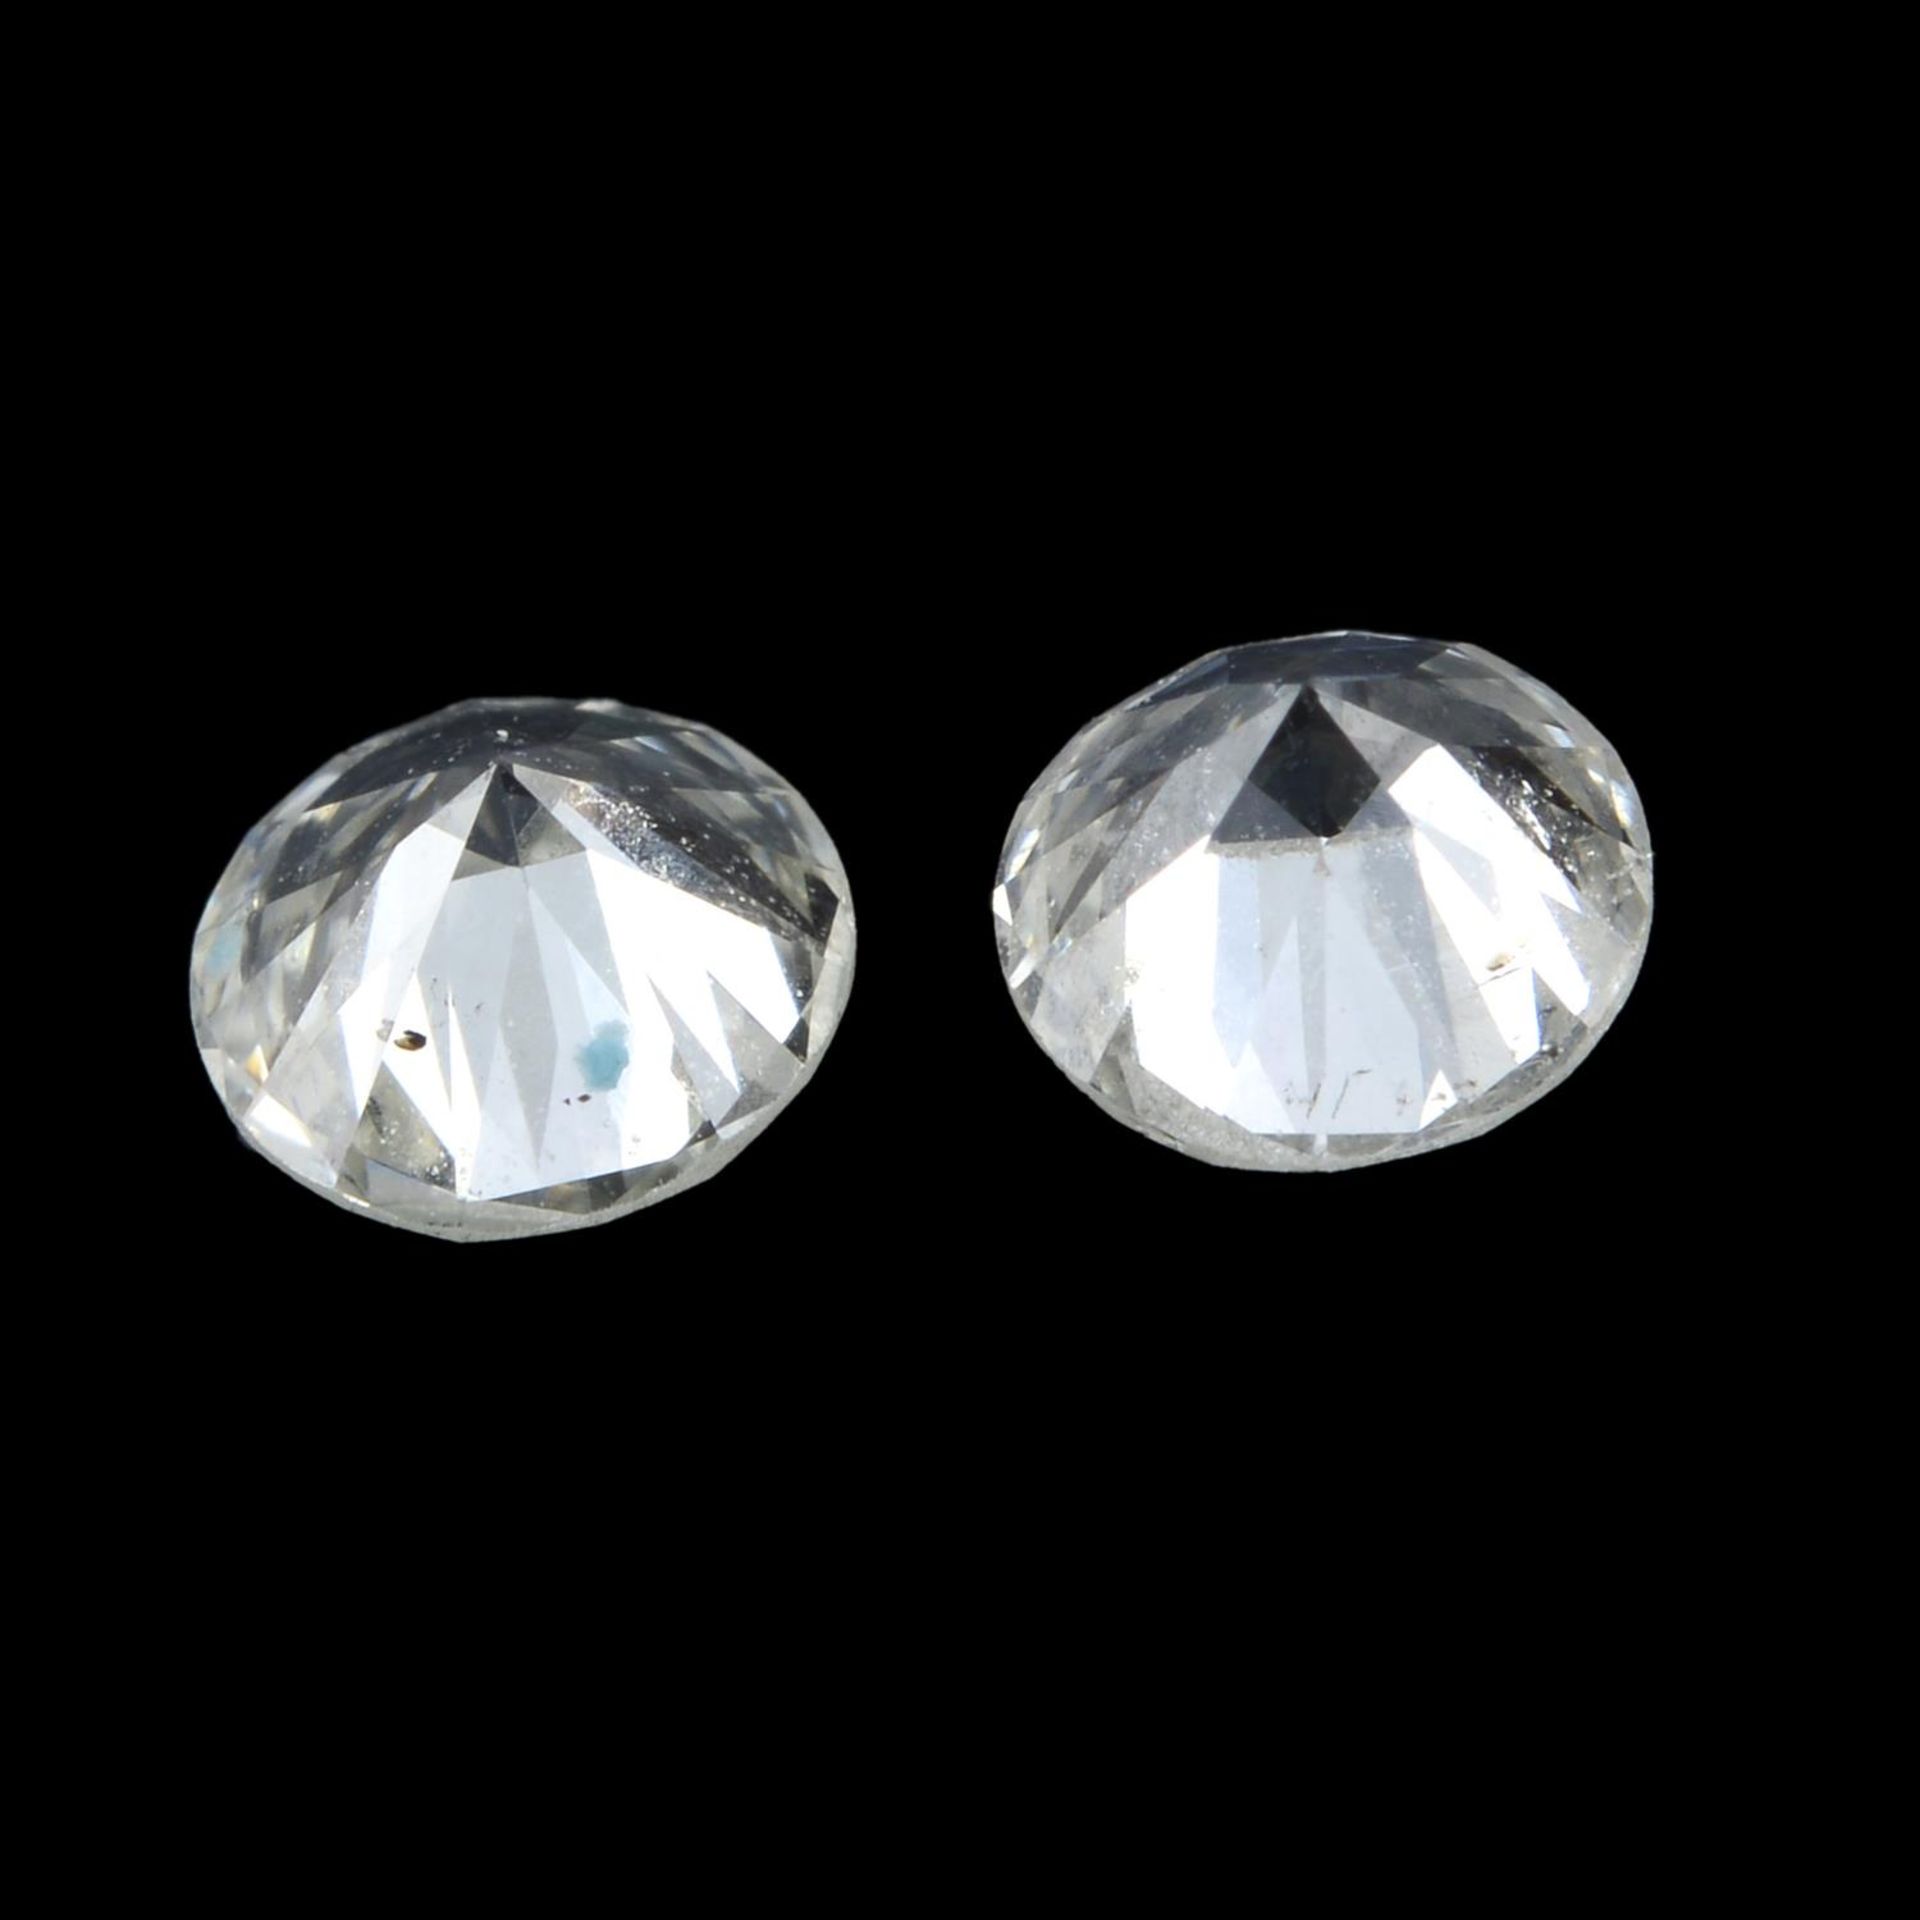 Pair of brilliant cut diamonds weighing 0.48ct - Image 2 of 2